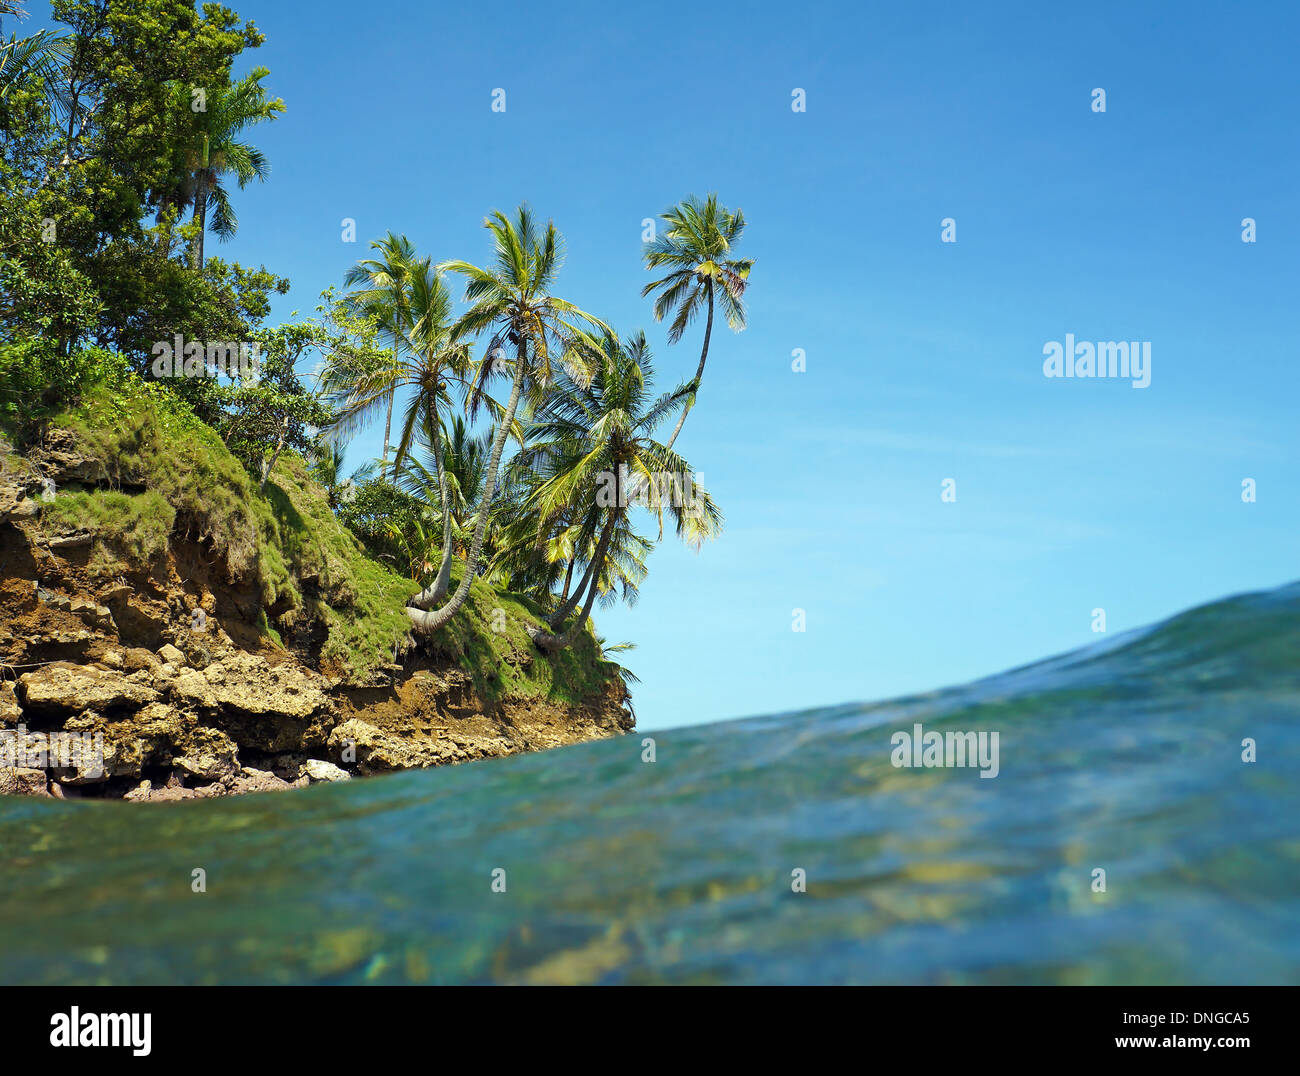 View from water surface with islet and coconut palm trees, Caribbean sea, Bocas del Toro, Panama Stock Photo